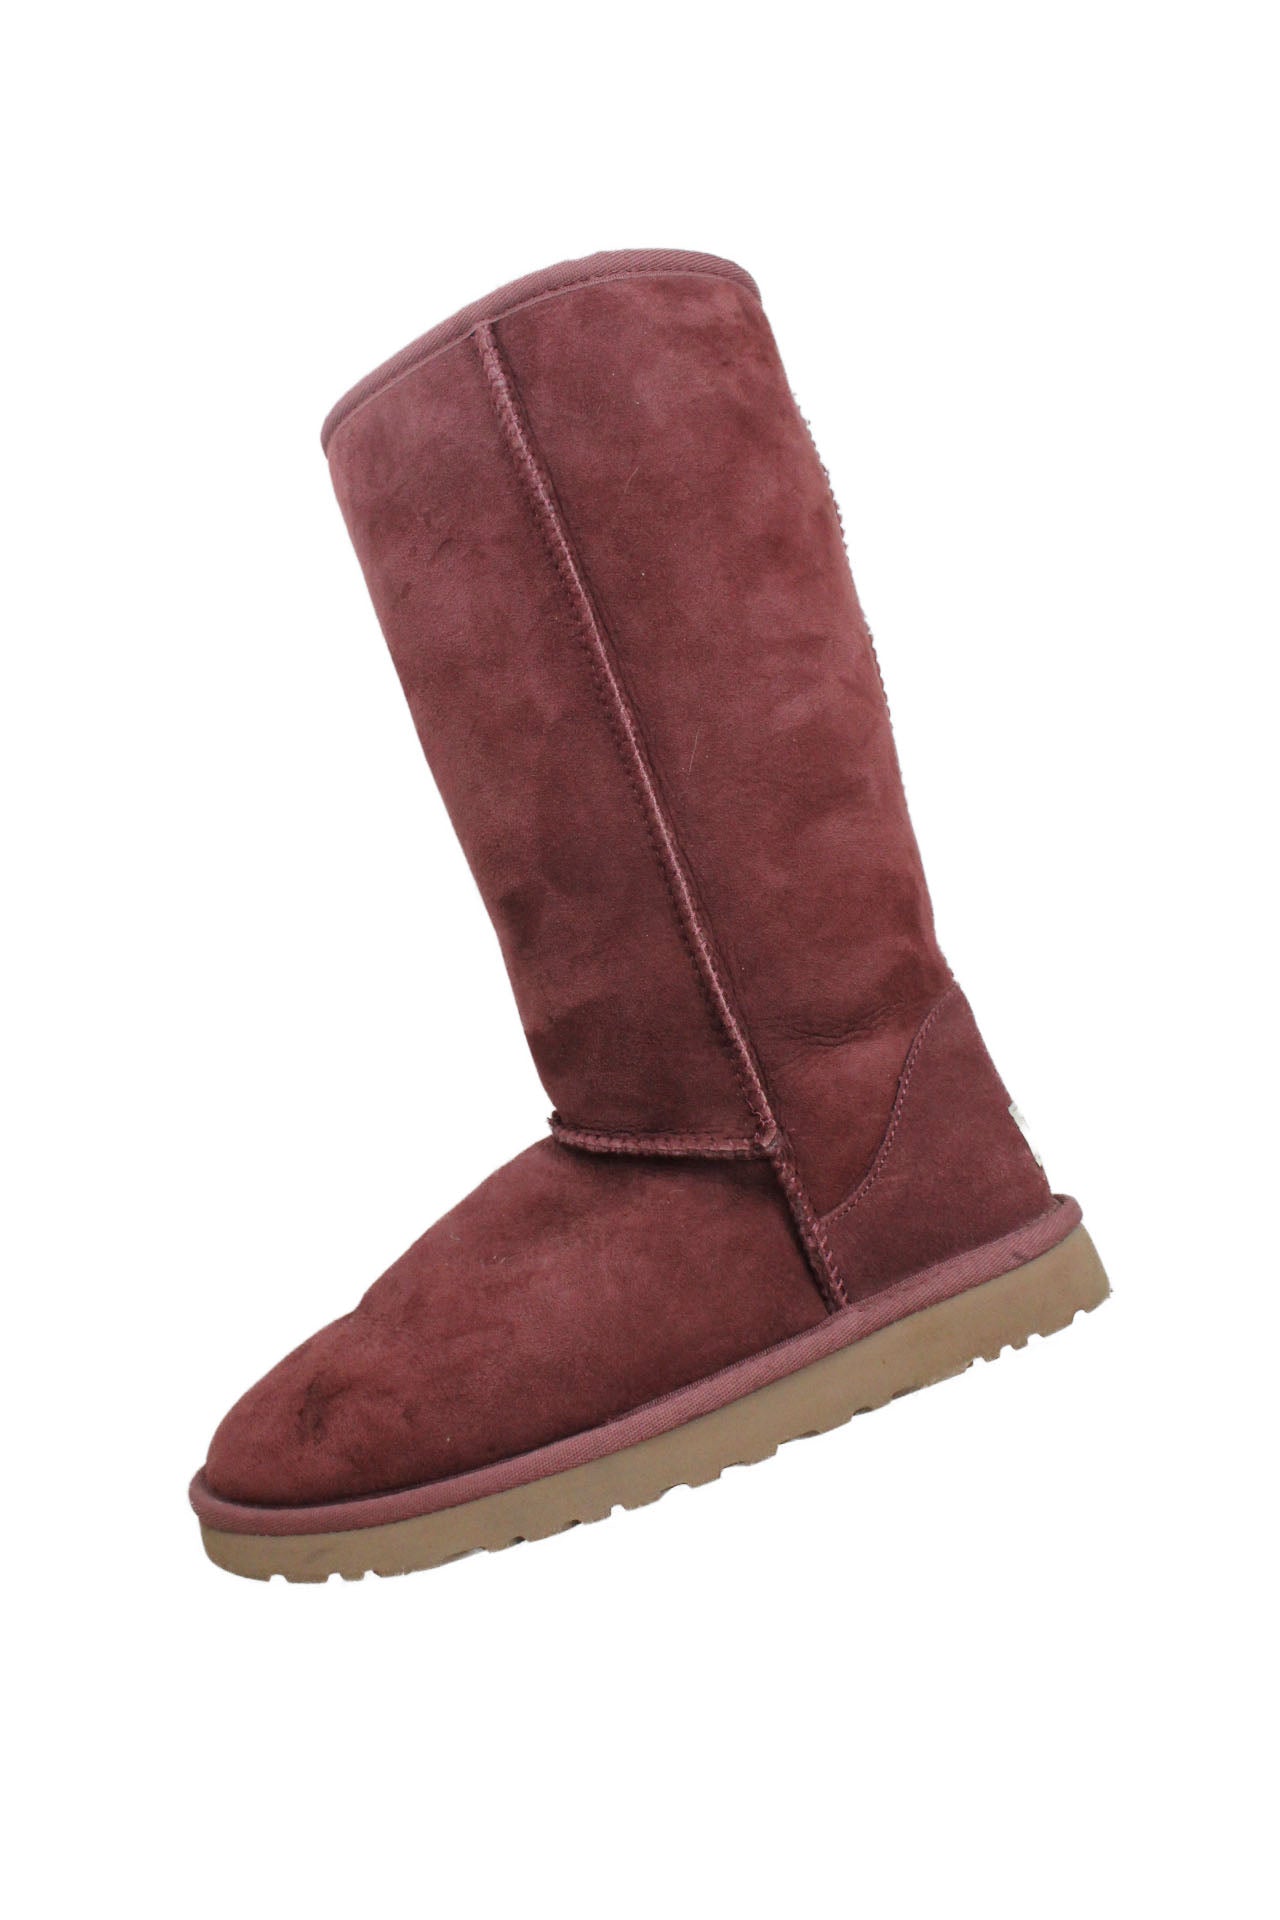 side of ugg austrailia raspberry tone high shearling boot. no closure, pull-on style. suede leather outer with shearling fur lining. 